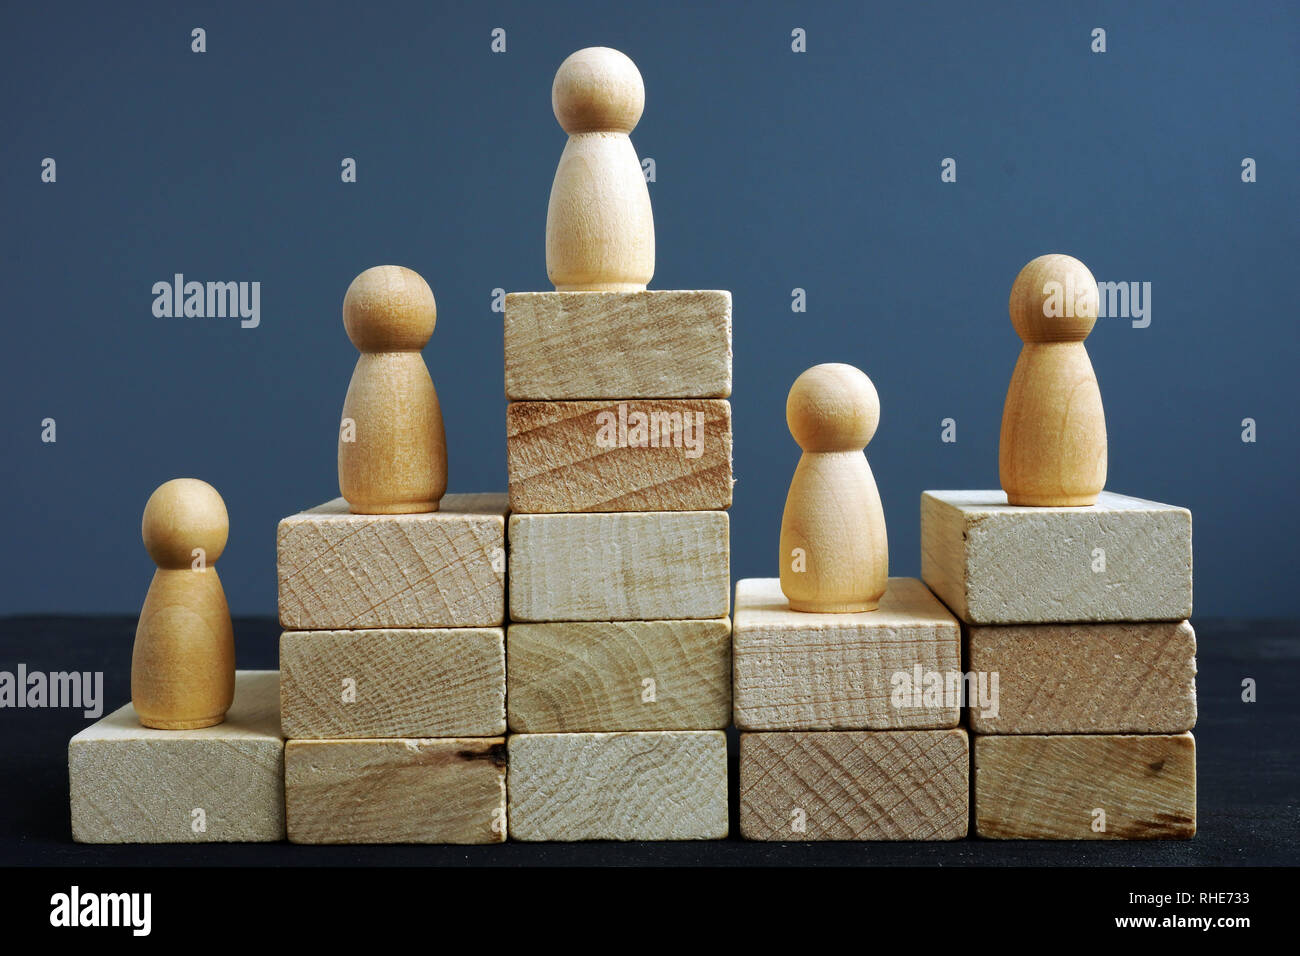 Employee productivity concept. Wooden blocks and figurines. Assessment in HR. Stock Photo